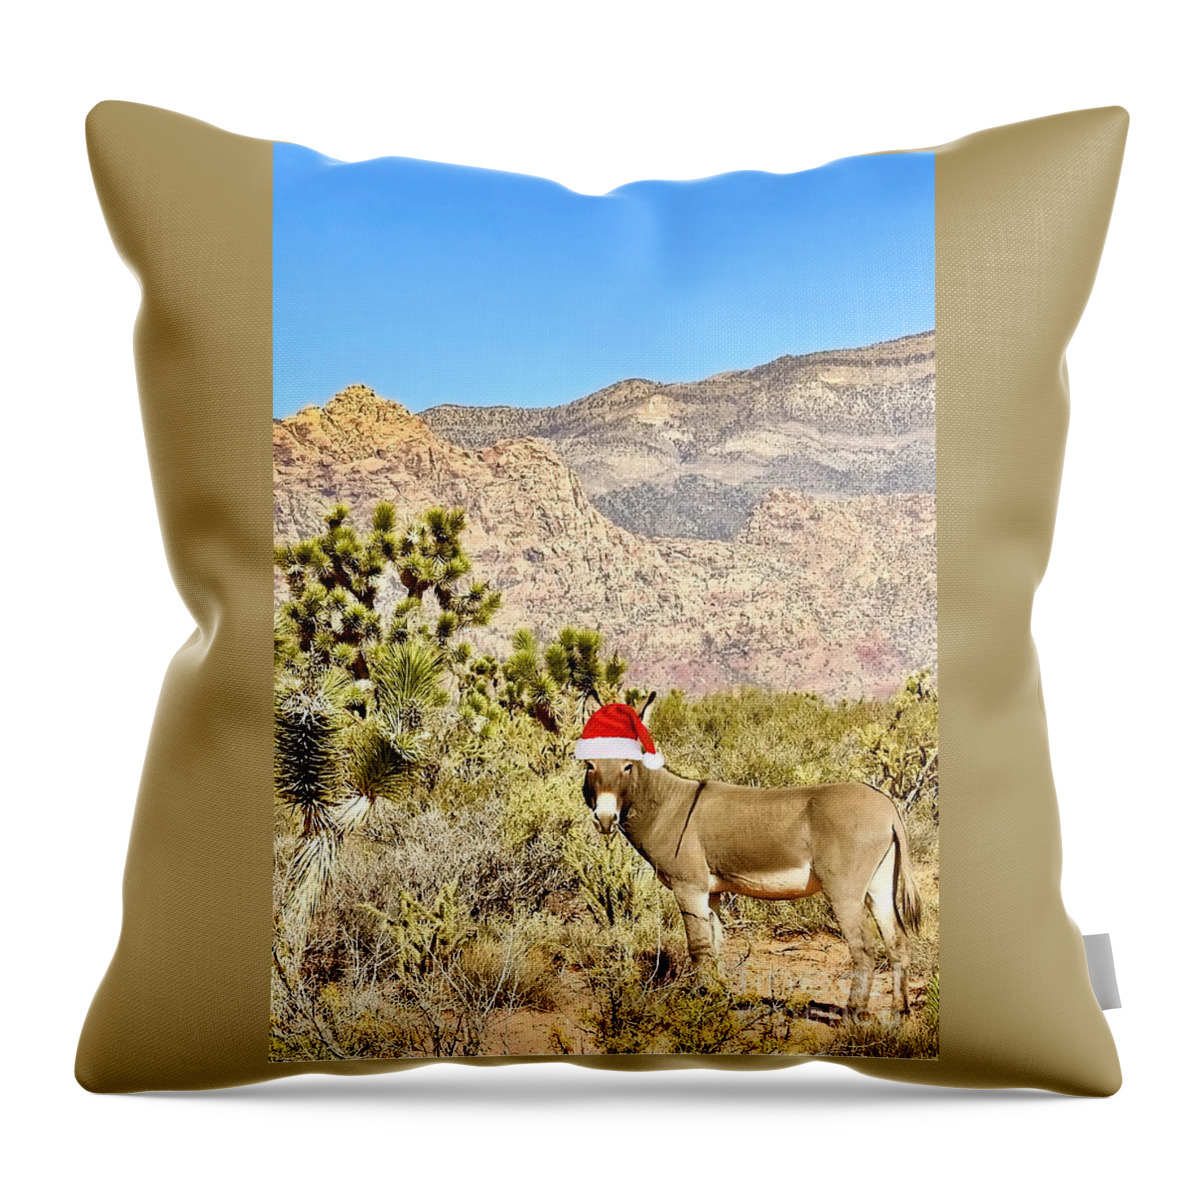 Donkey Throw Pillow featuring the photograph Desert Donkey - Christmas Edition by Beth Myer Photography